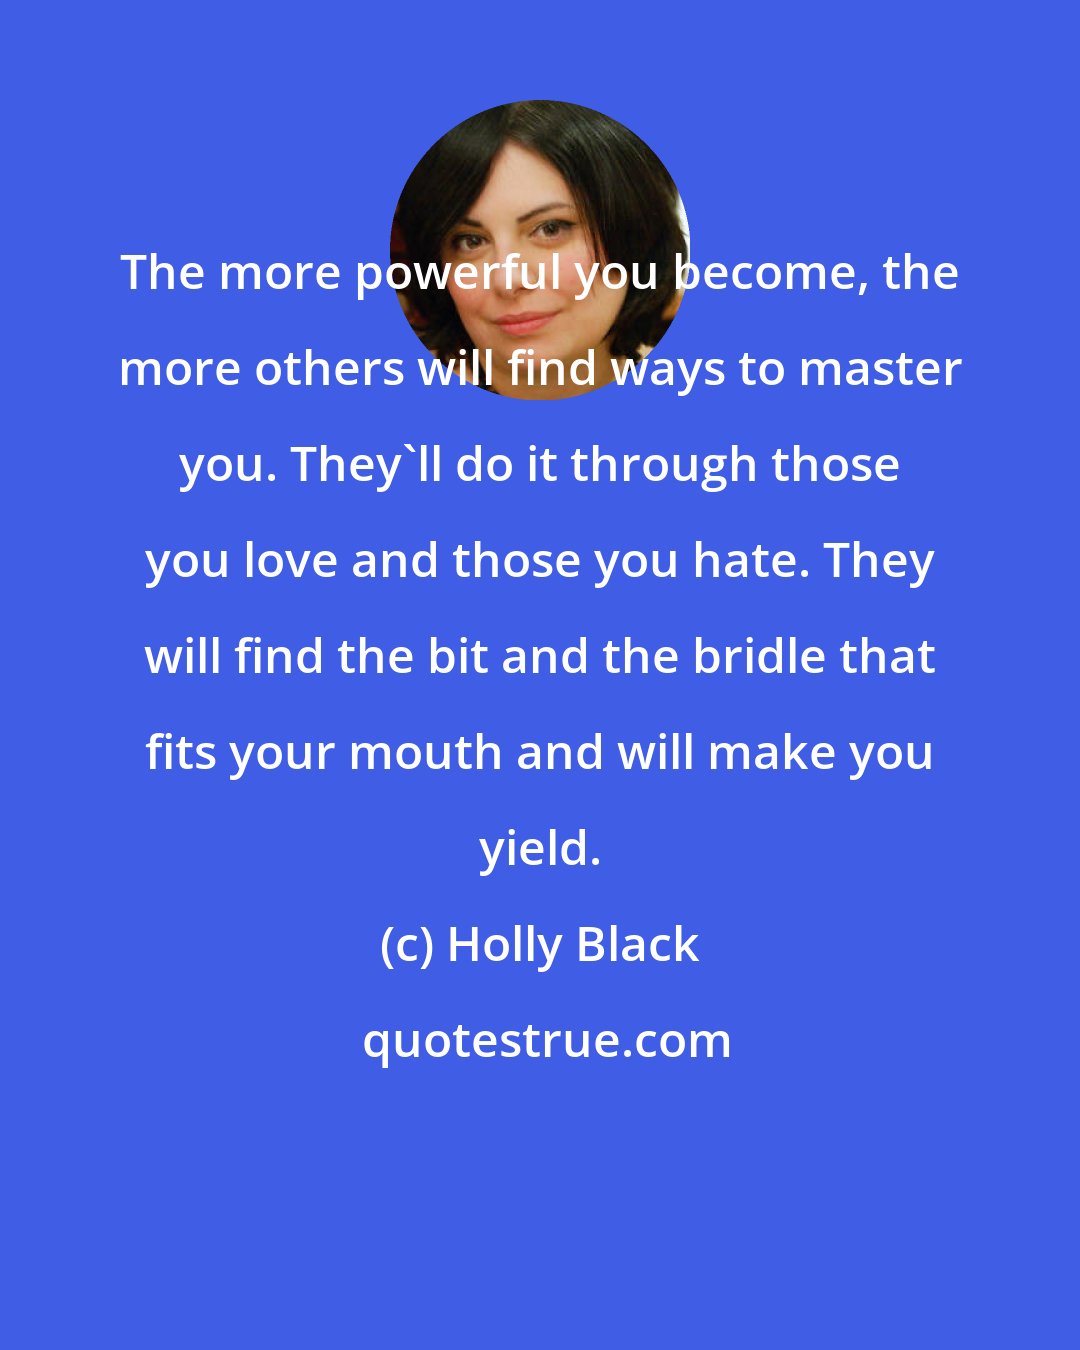 Holly Black: The more powerful you become, the more others will find ways to master you. They'll do it through those you love and those you hate. They will find the bit and the bridle that fits your mouth and will make you yield.